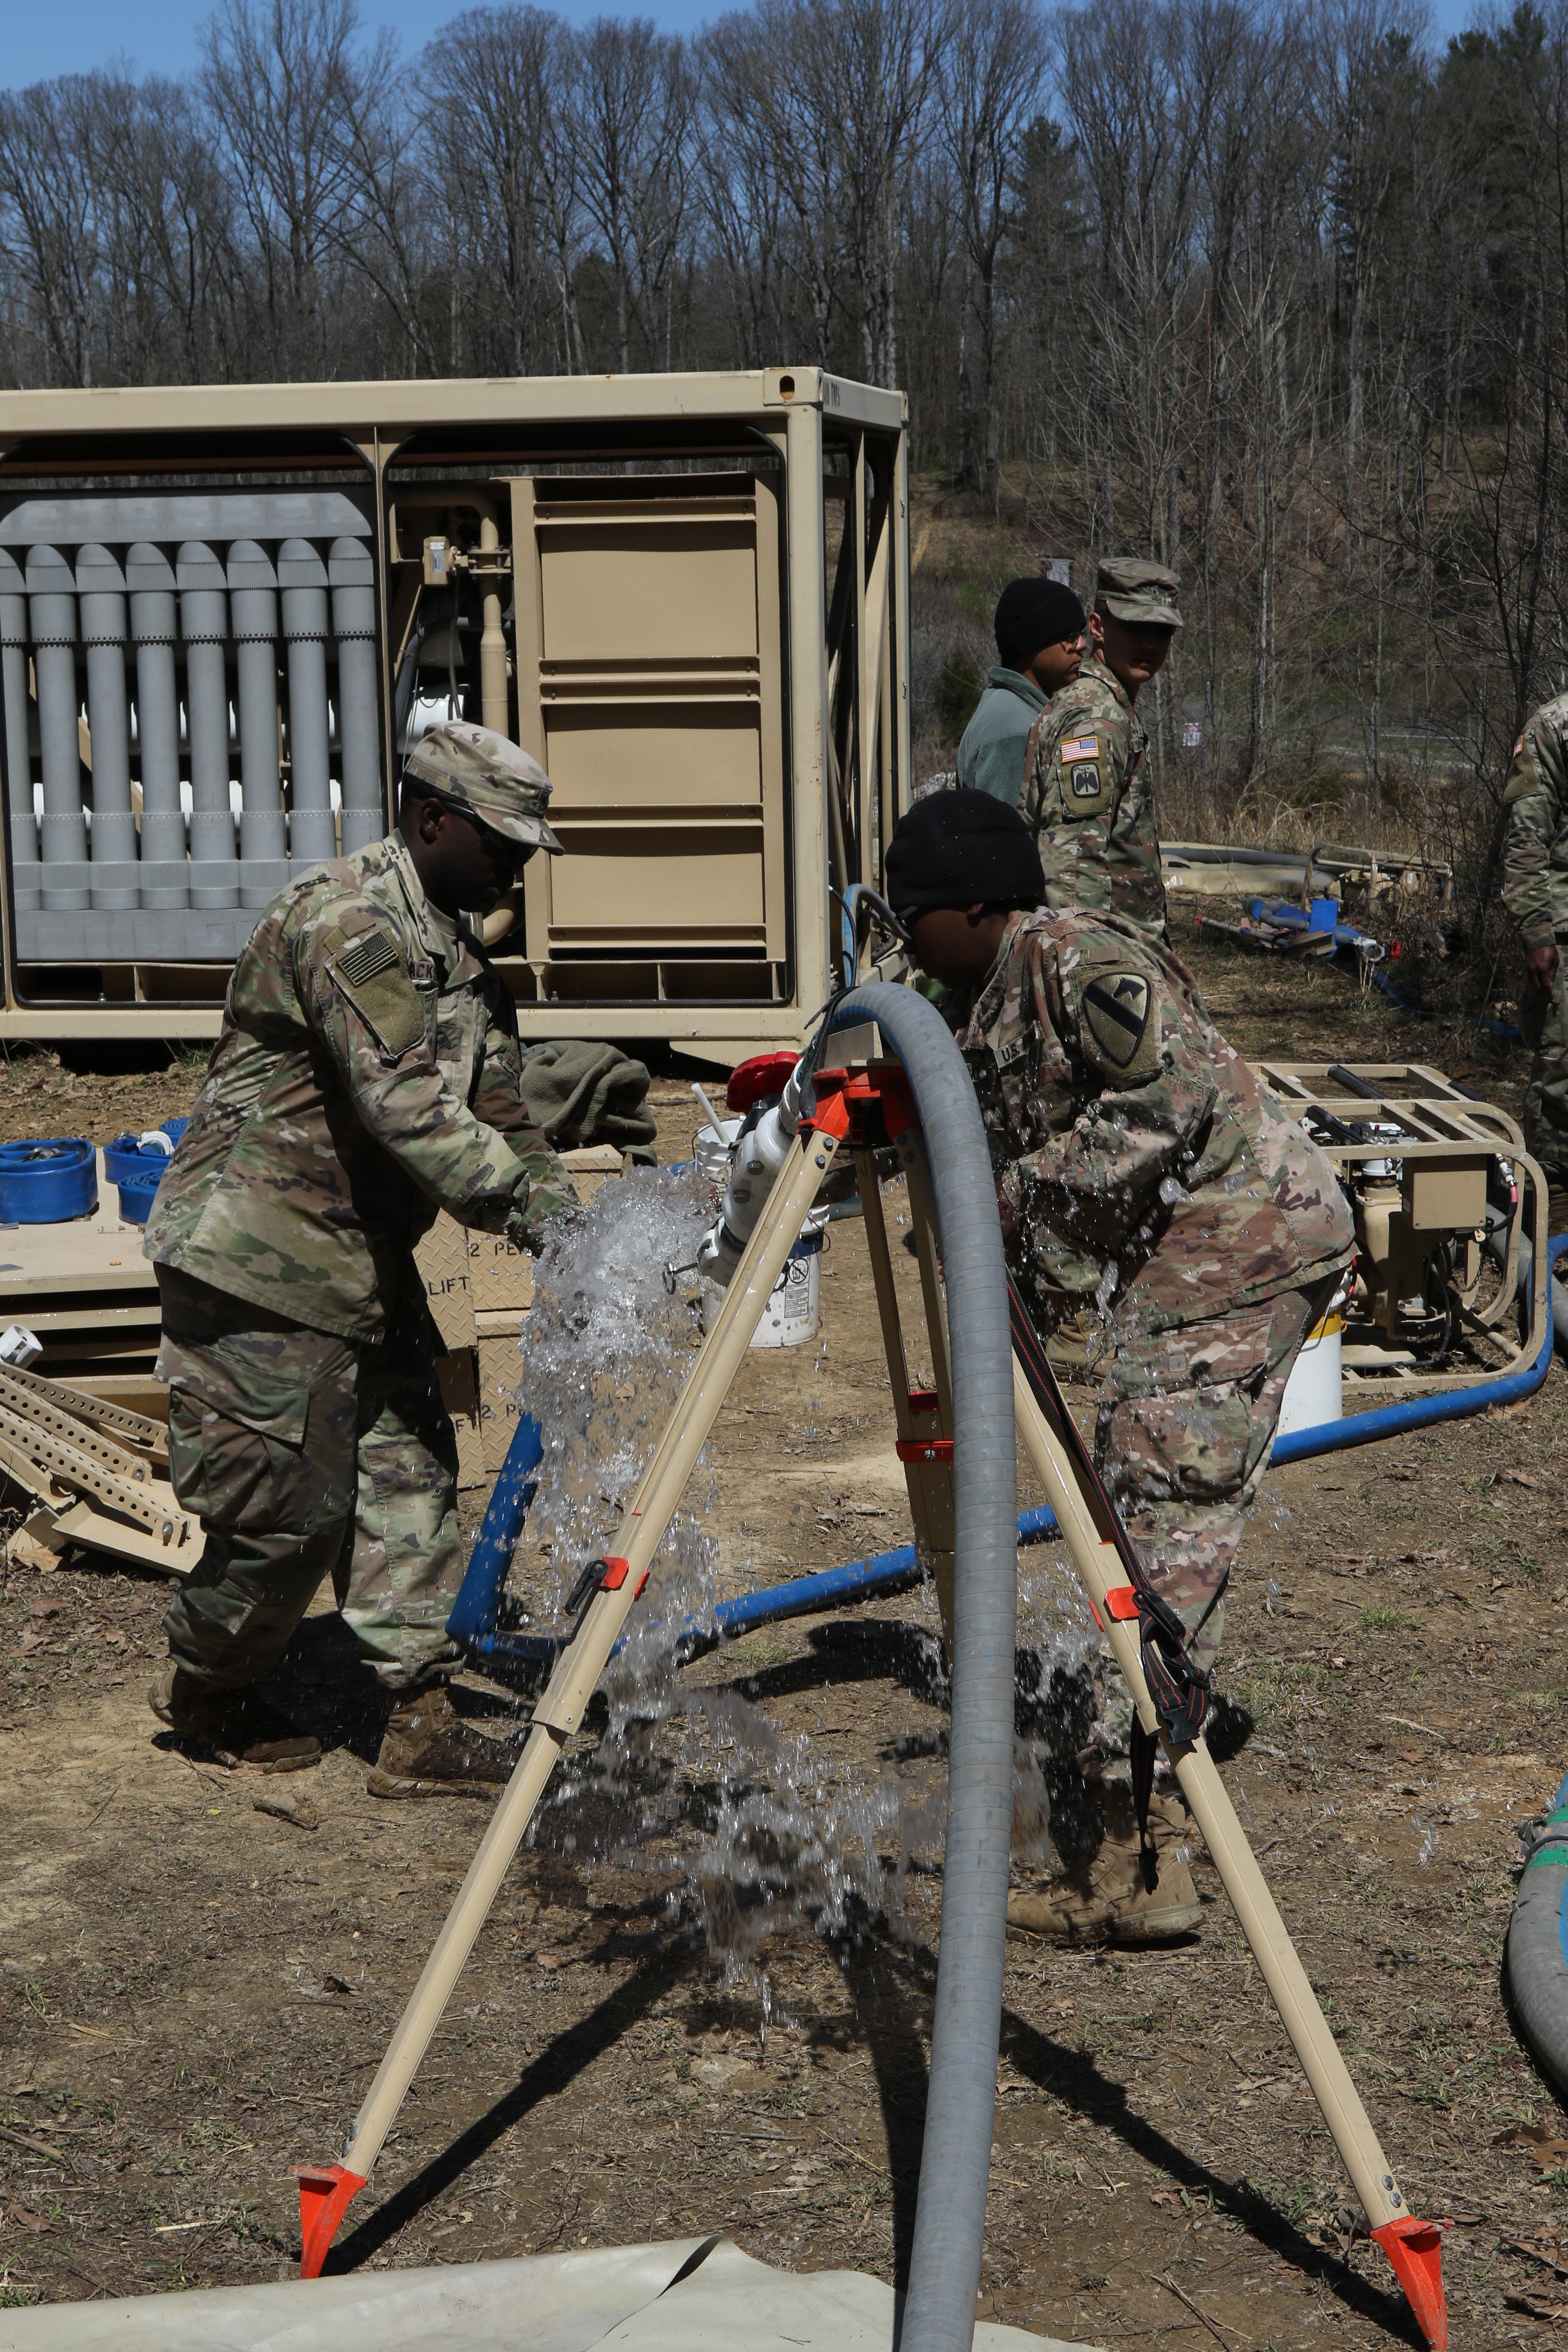 Water purification specialists hydrate soldiers, enhance skills